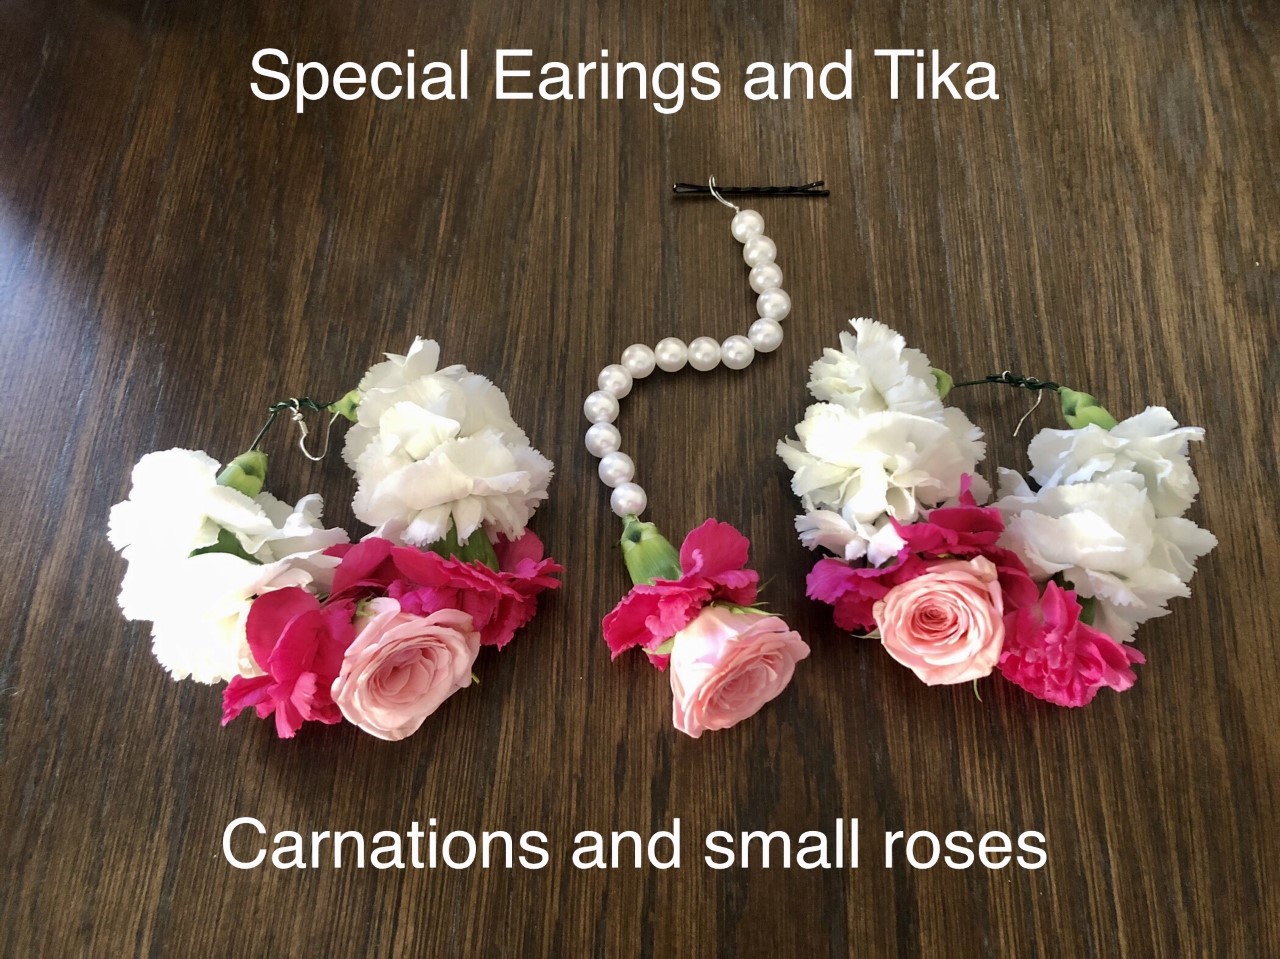 $50  small roses and carnations earings and tika set                              